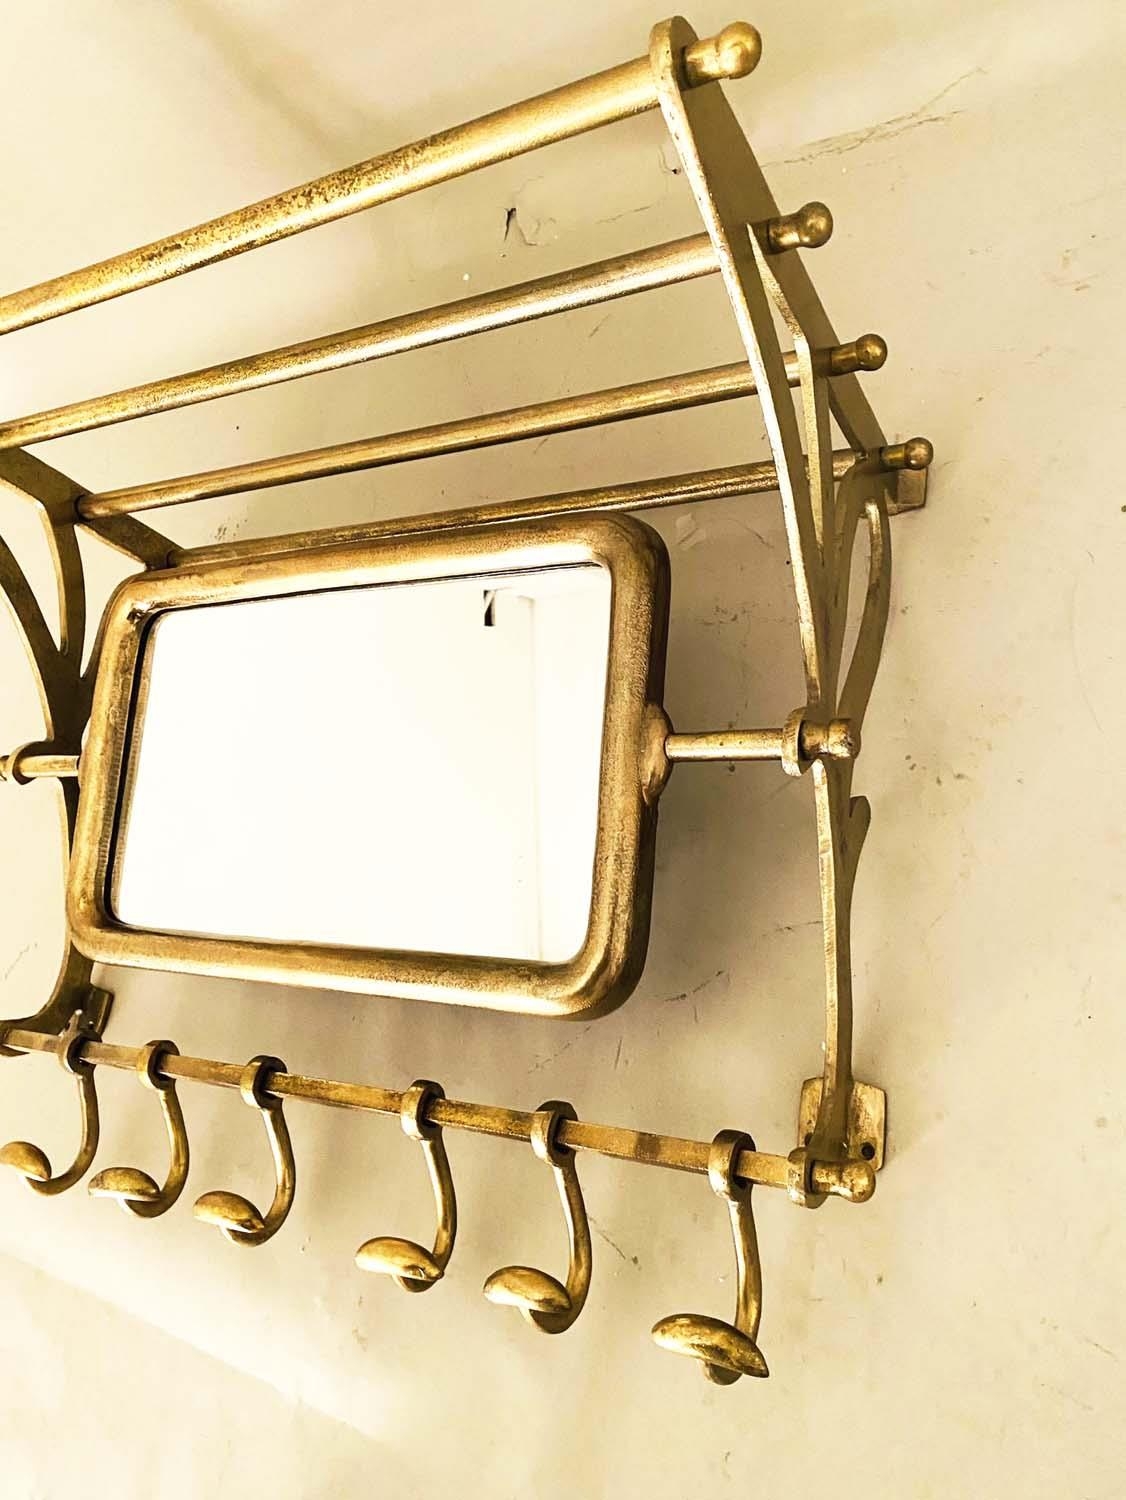 WALL MOUNTING LUGGAGE RACK, rotating mirror and coat hooks, gilt metal, 54cm x 67cm x 36cm. - Image 4 of 5